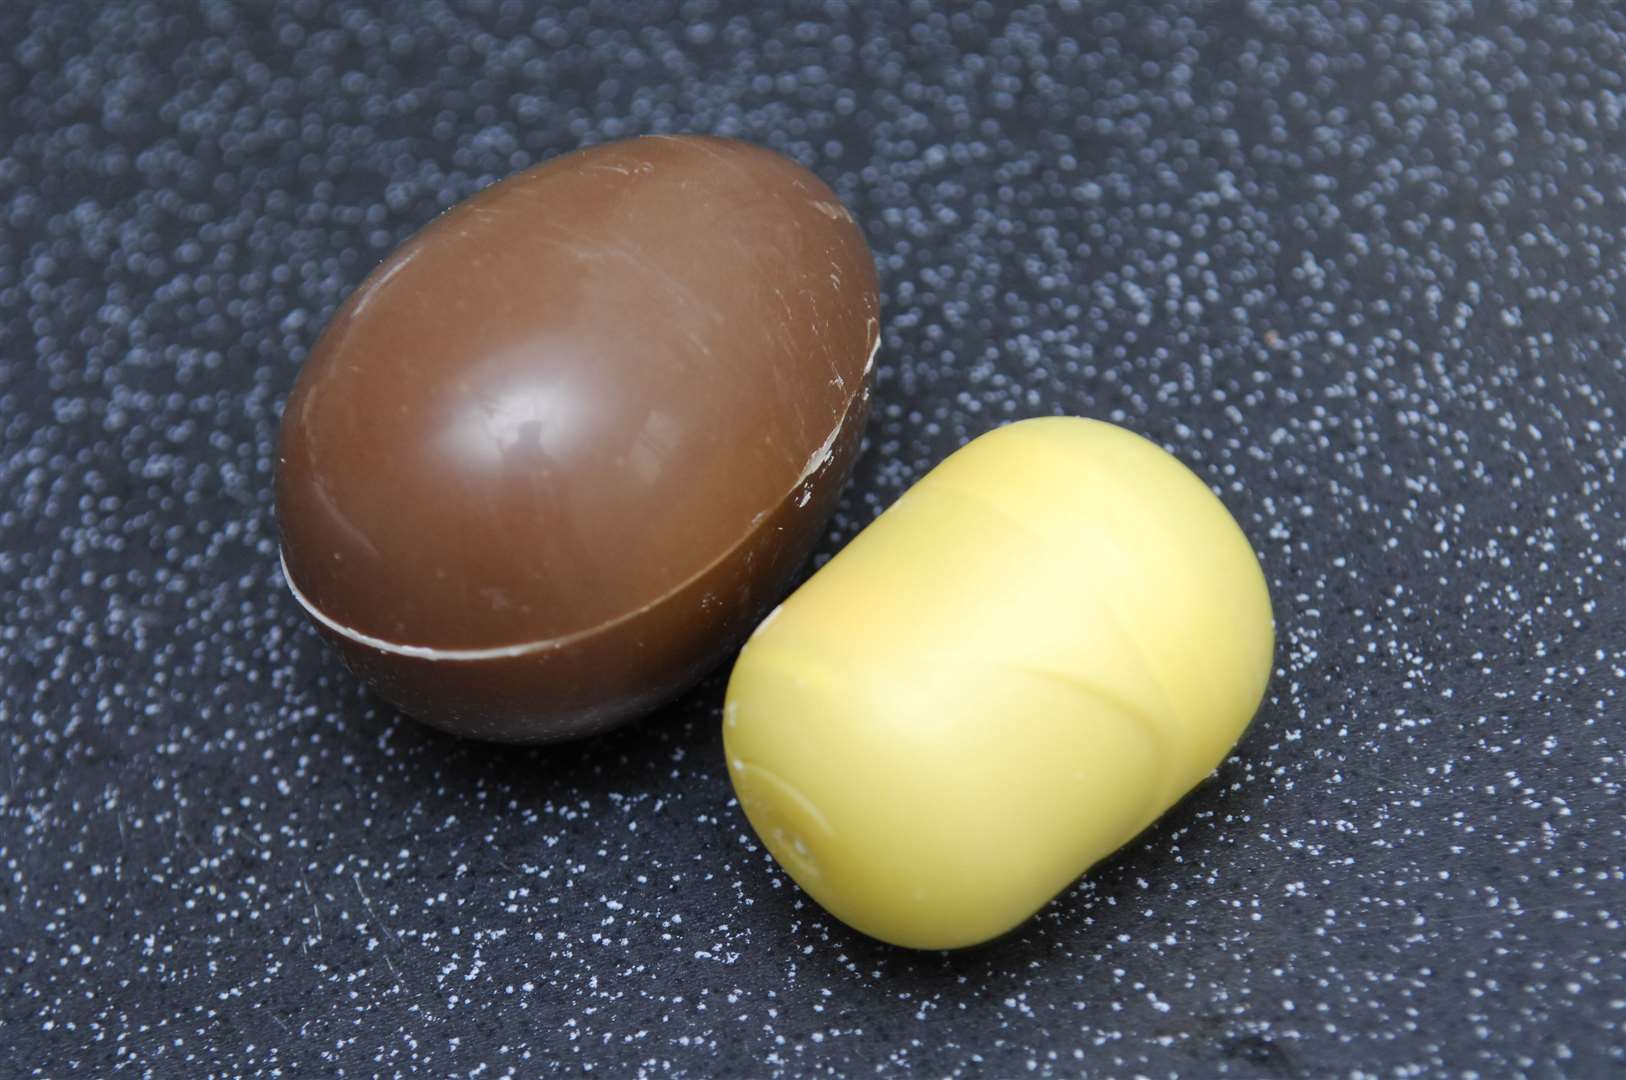 Kinder eggs hide a toy inside the chocolate